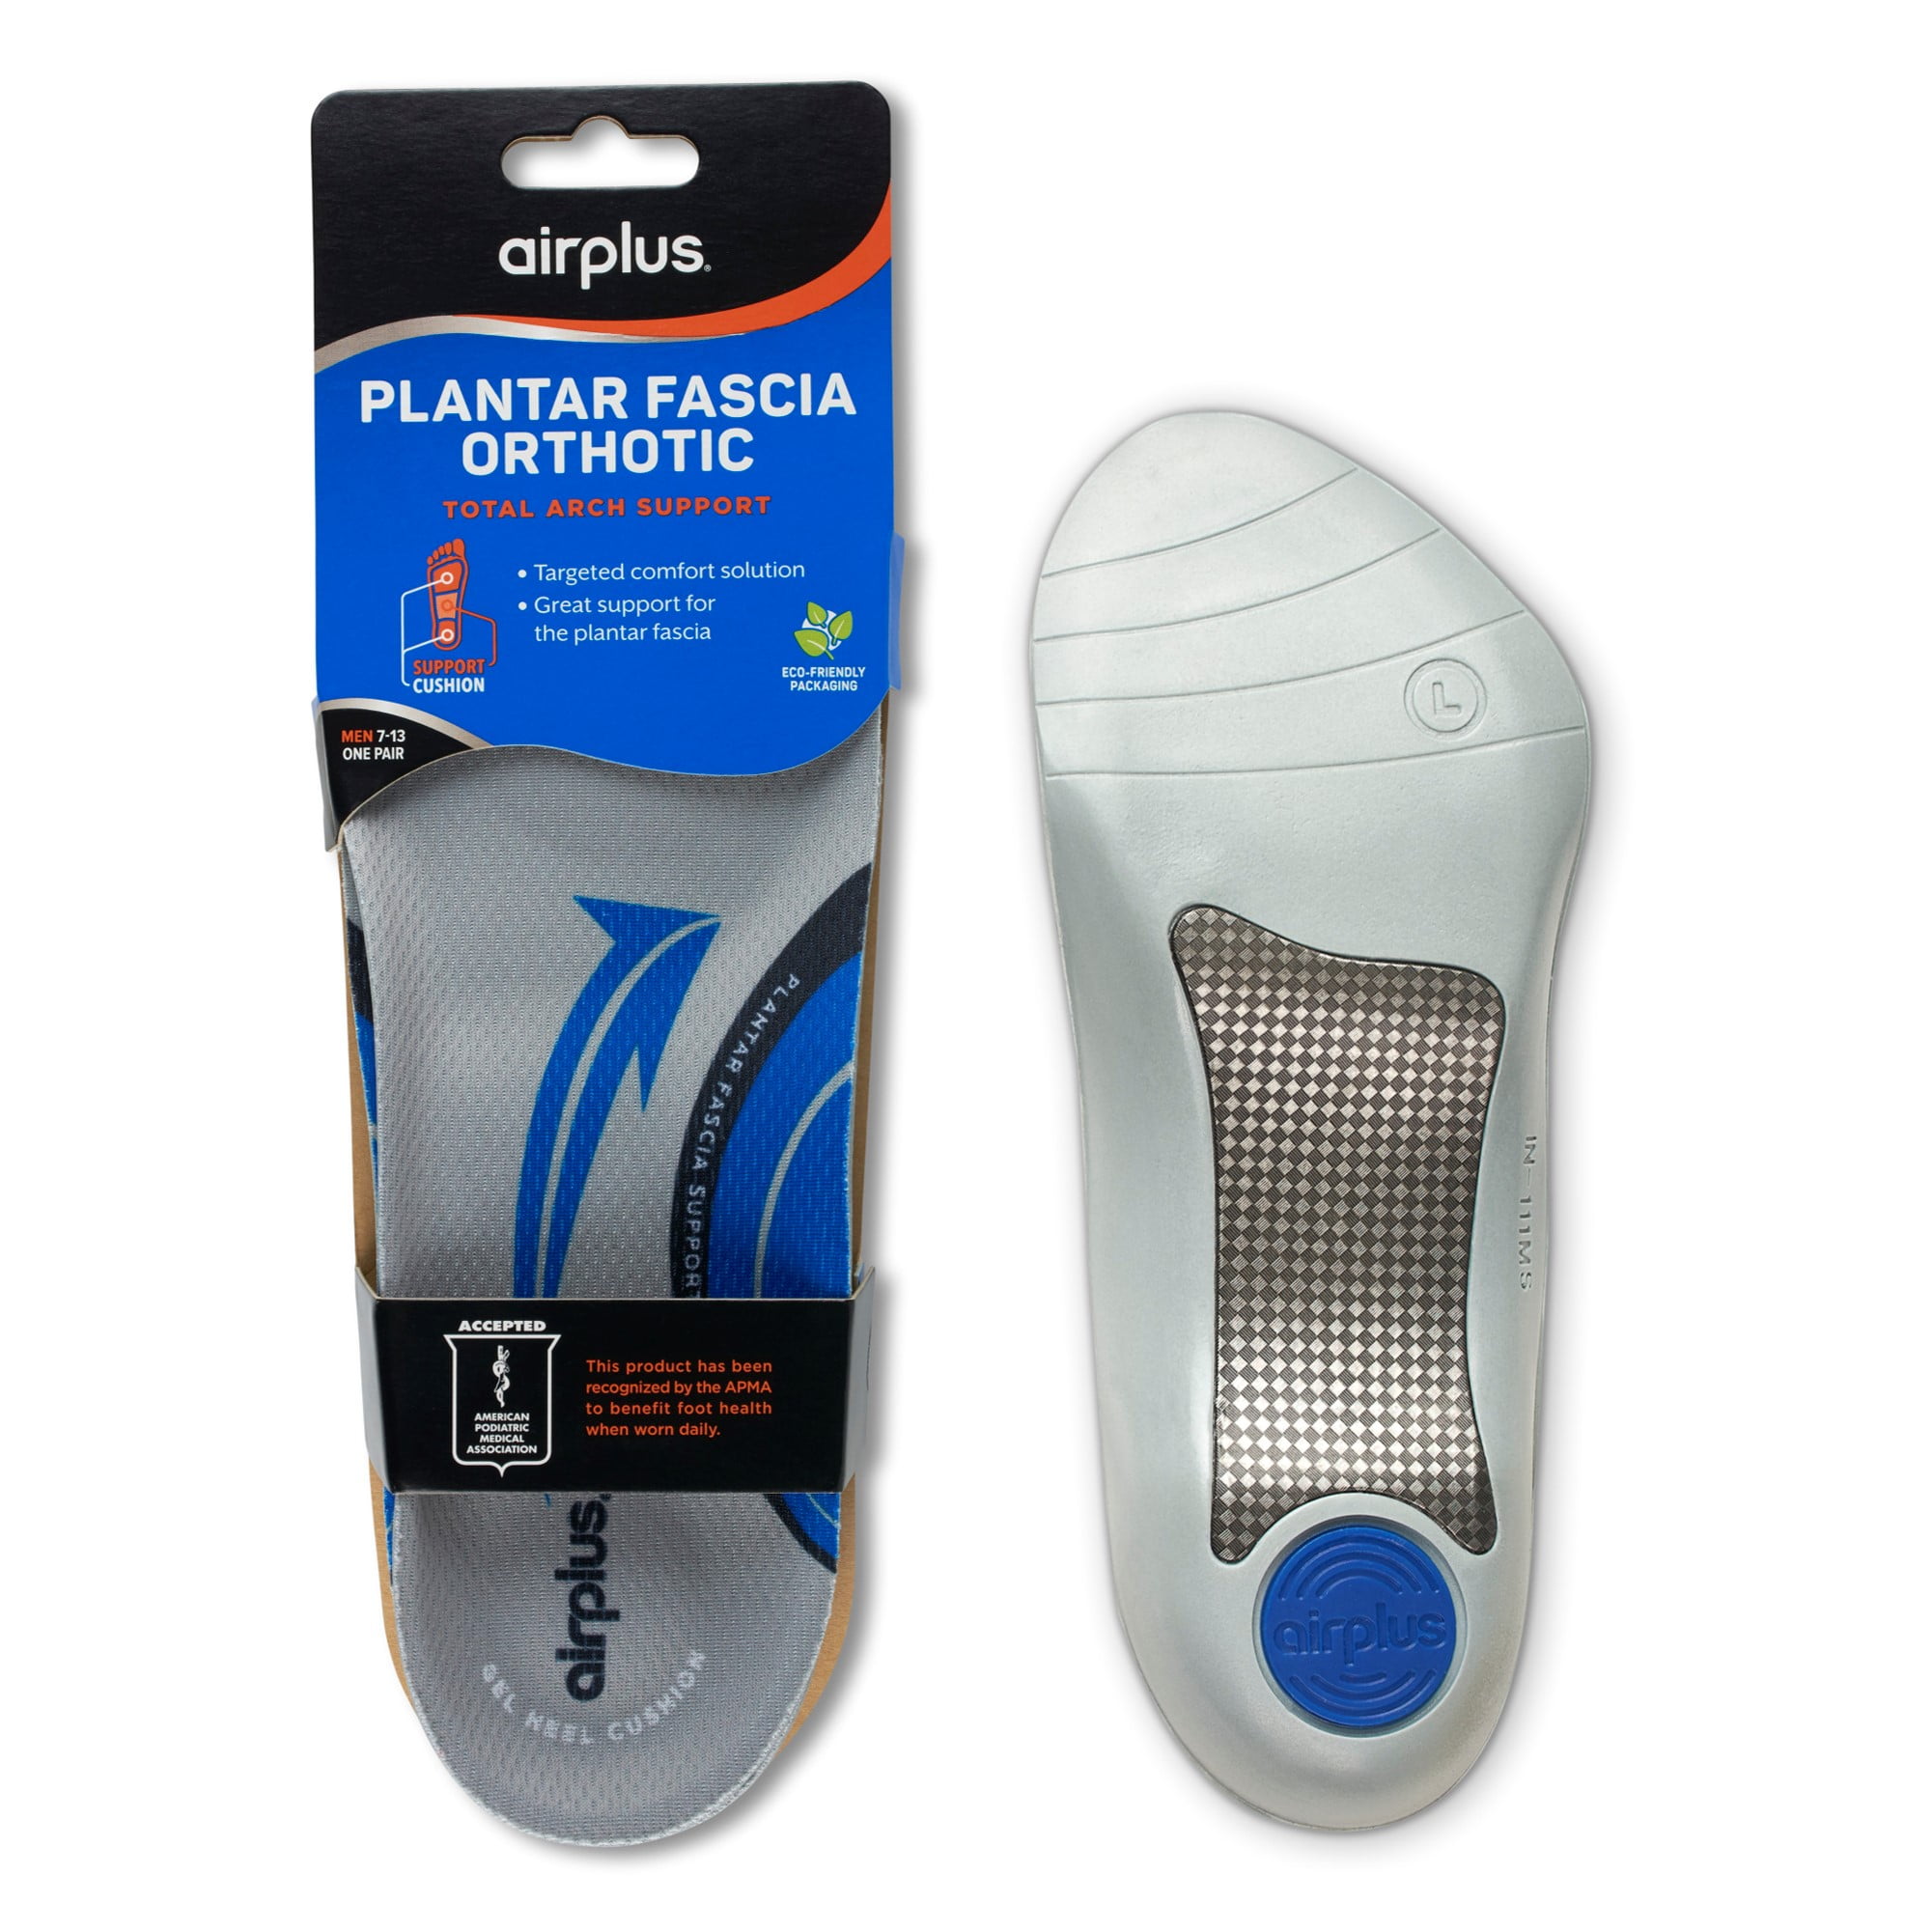 Airplus Plantar Fascia Insole for support and comfort, Men's size 7-12